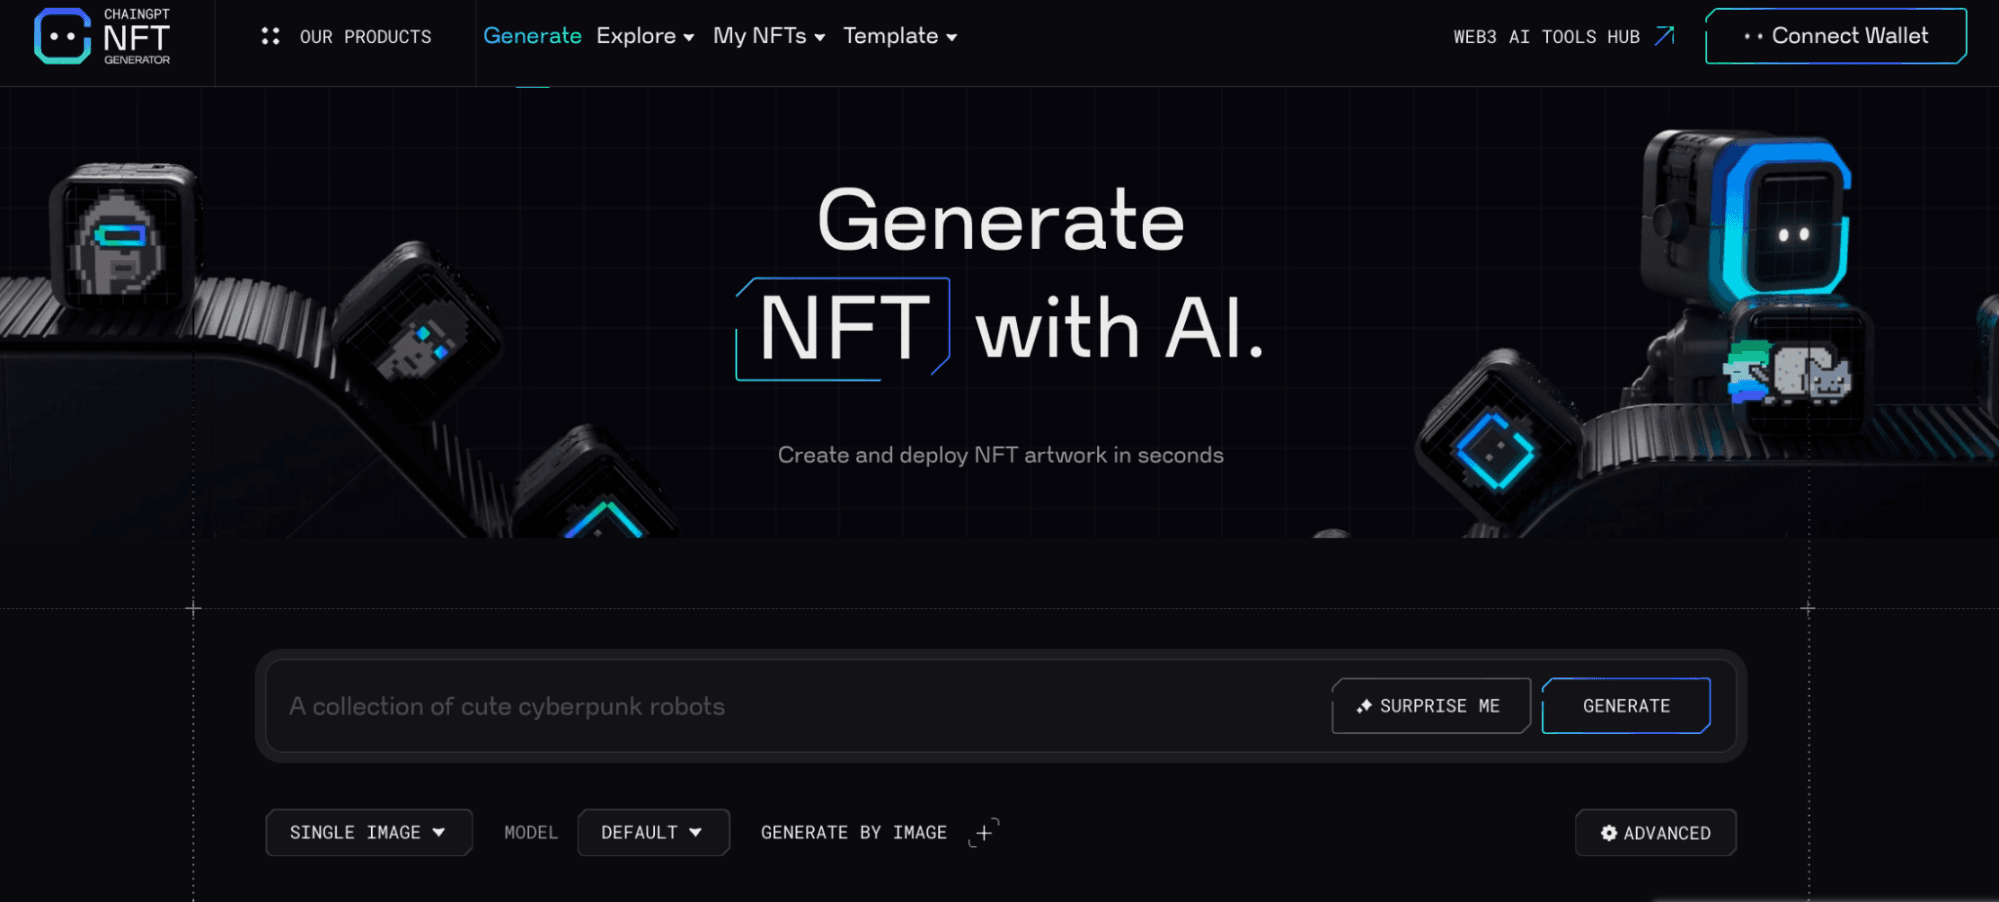 Screenshot of ChainGPT's AI NFT Generator at NFT.Chaingpt.org. ChainGPT's AI NFT Generator logo. Keywords: AI NFT, Web3, crypto, blockchain, NFT creation, artificial intelligence, digital art, decentralized technology, smart contracts, ChainGPT platform, cryptocurrency, non-fungible tokens, crypto art, NFT marketplace, AI-powered NFT generation, decentralized finance, DeFi, NFT collectibles, Ethereum, Binance Smart Chain, digital assets, NFT minting, AI-driven art, crypto innovation, NFT economy, tokenization.